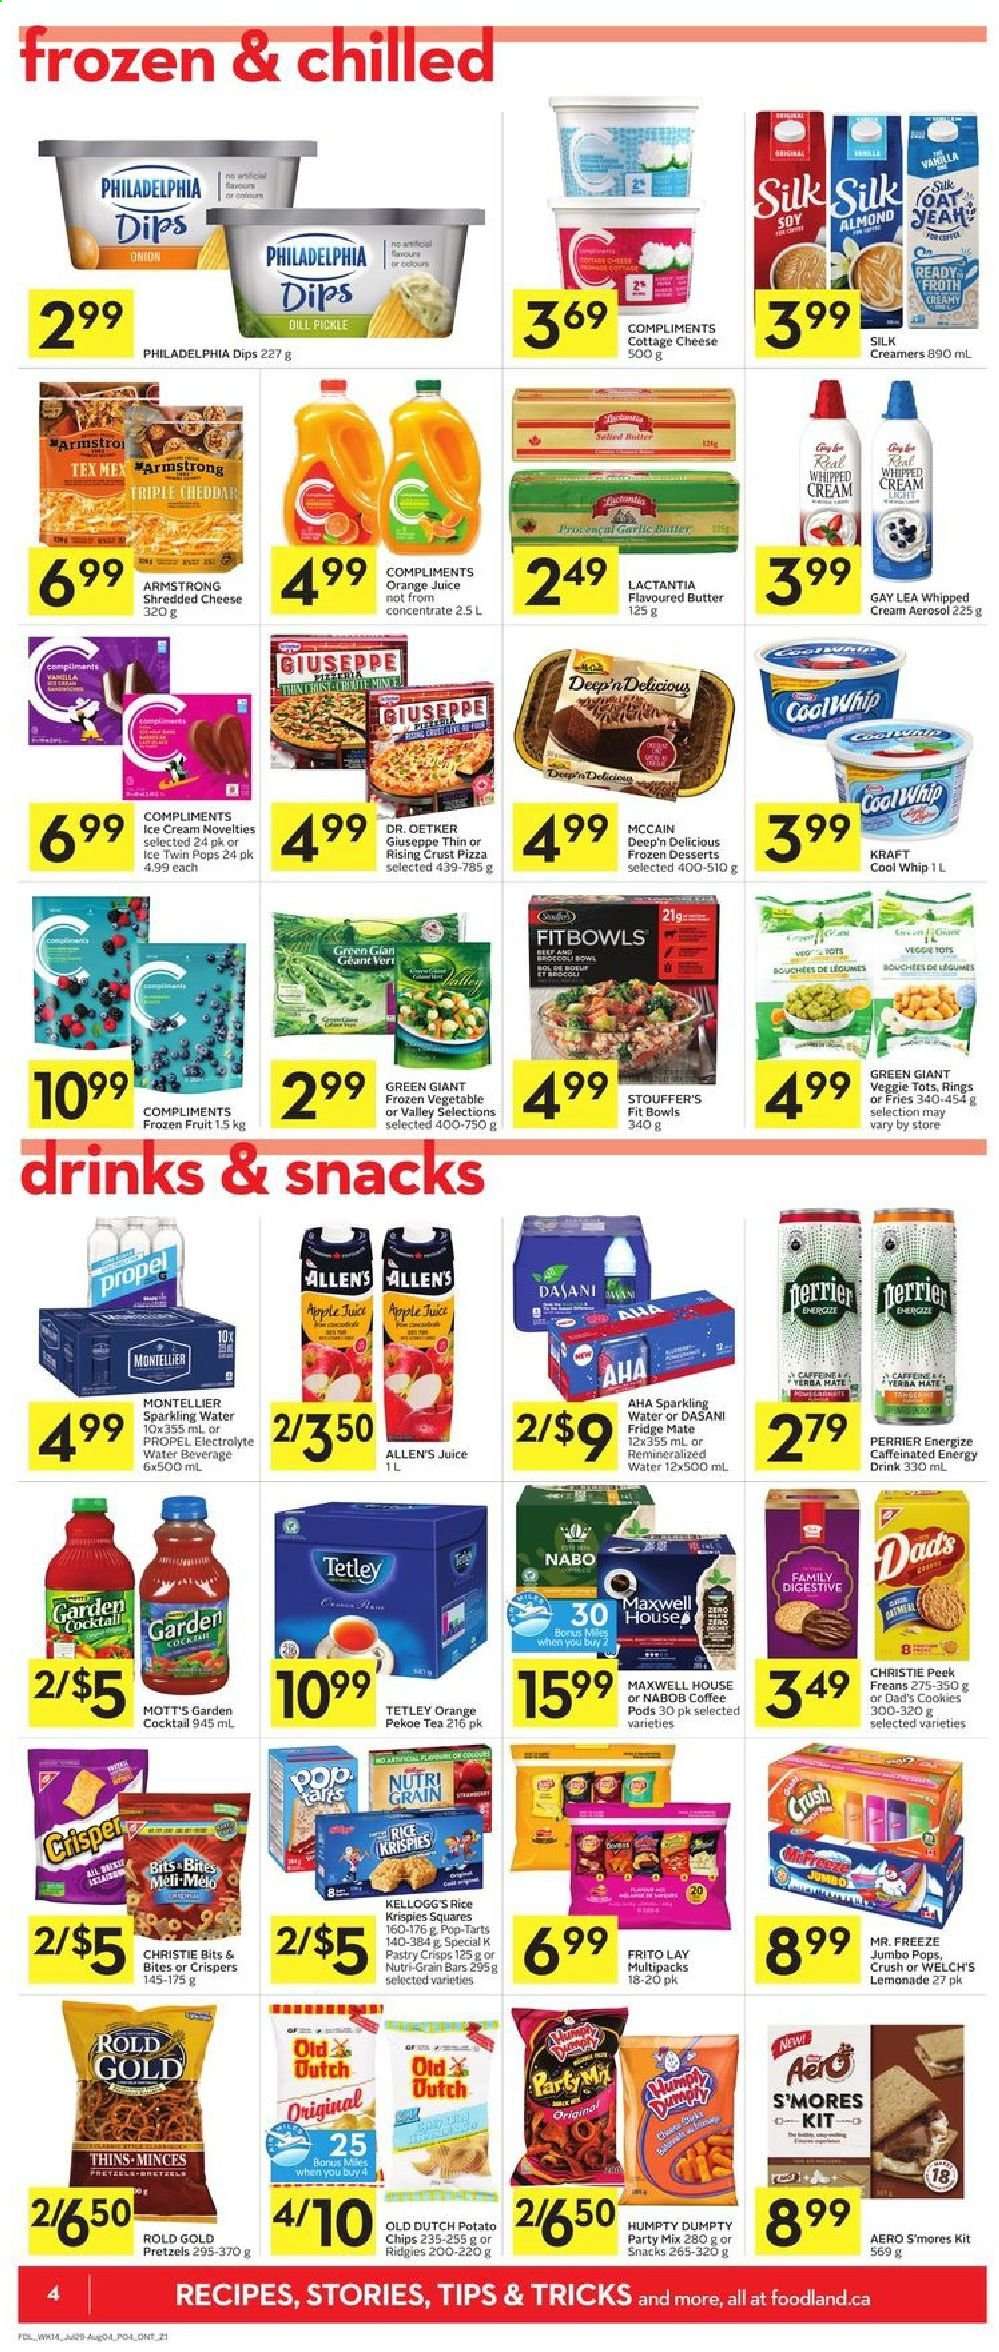 thumbnail - Foodland Flyer - July 29, 2021 - August 04, 2021 - Sales products - pretzels, garlic, onion, Welch's, Mott's, pizza, Kraft®, cottage cheese, shredded cheese, Dr. Oetker, Silk, butter, Cool Whip, whipped cream, ice cream, Stouffer's, McCain, potato fries, cookies, Kellogg's, Digestive, Pop-Tarts, dill pickle, potato chips, Thins, Rice Krispies, Nutri-Grain, dill, orange juice, juice, energy drink, Perrier, sparkling water, Maxwell House, tea, coffee pods. Page 4.